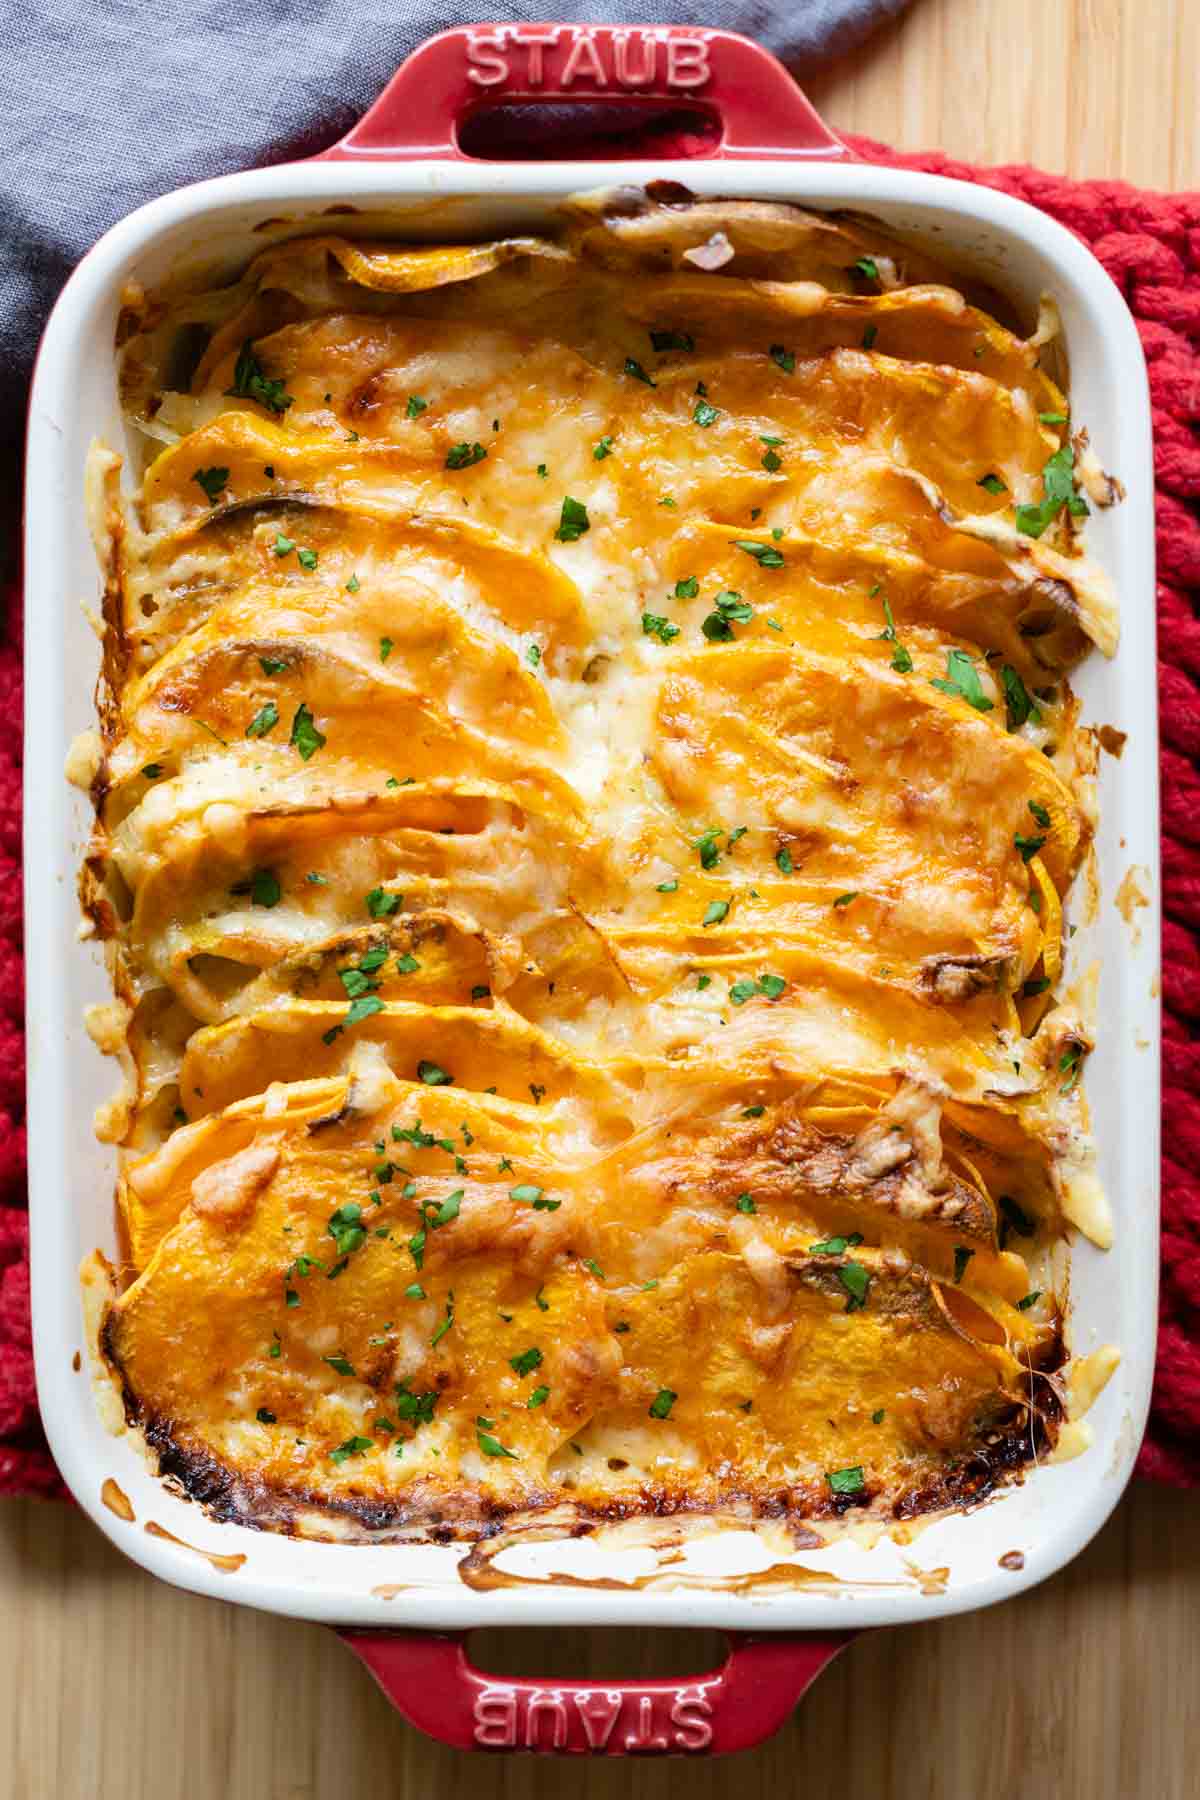 Red casserole dish with sweet potato gratin in it.